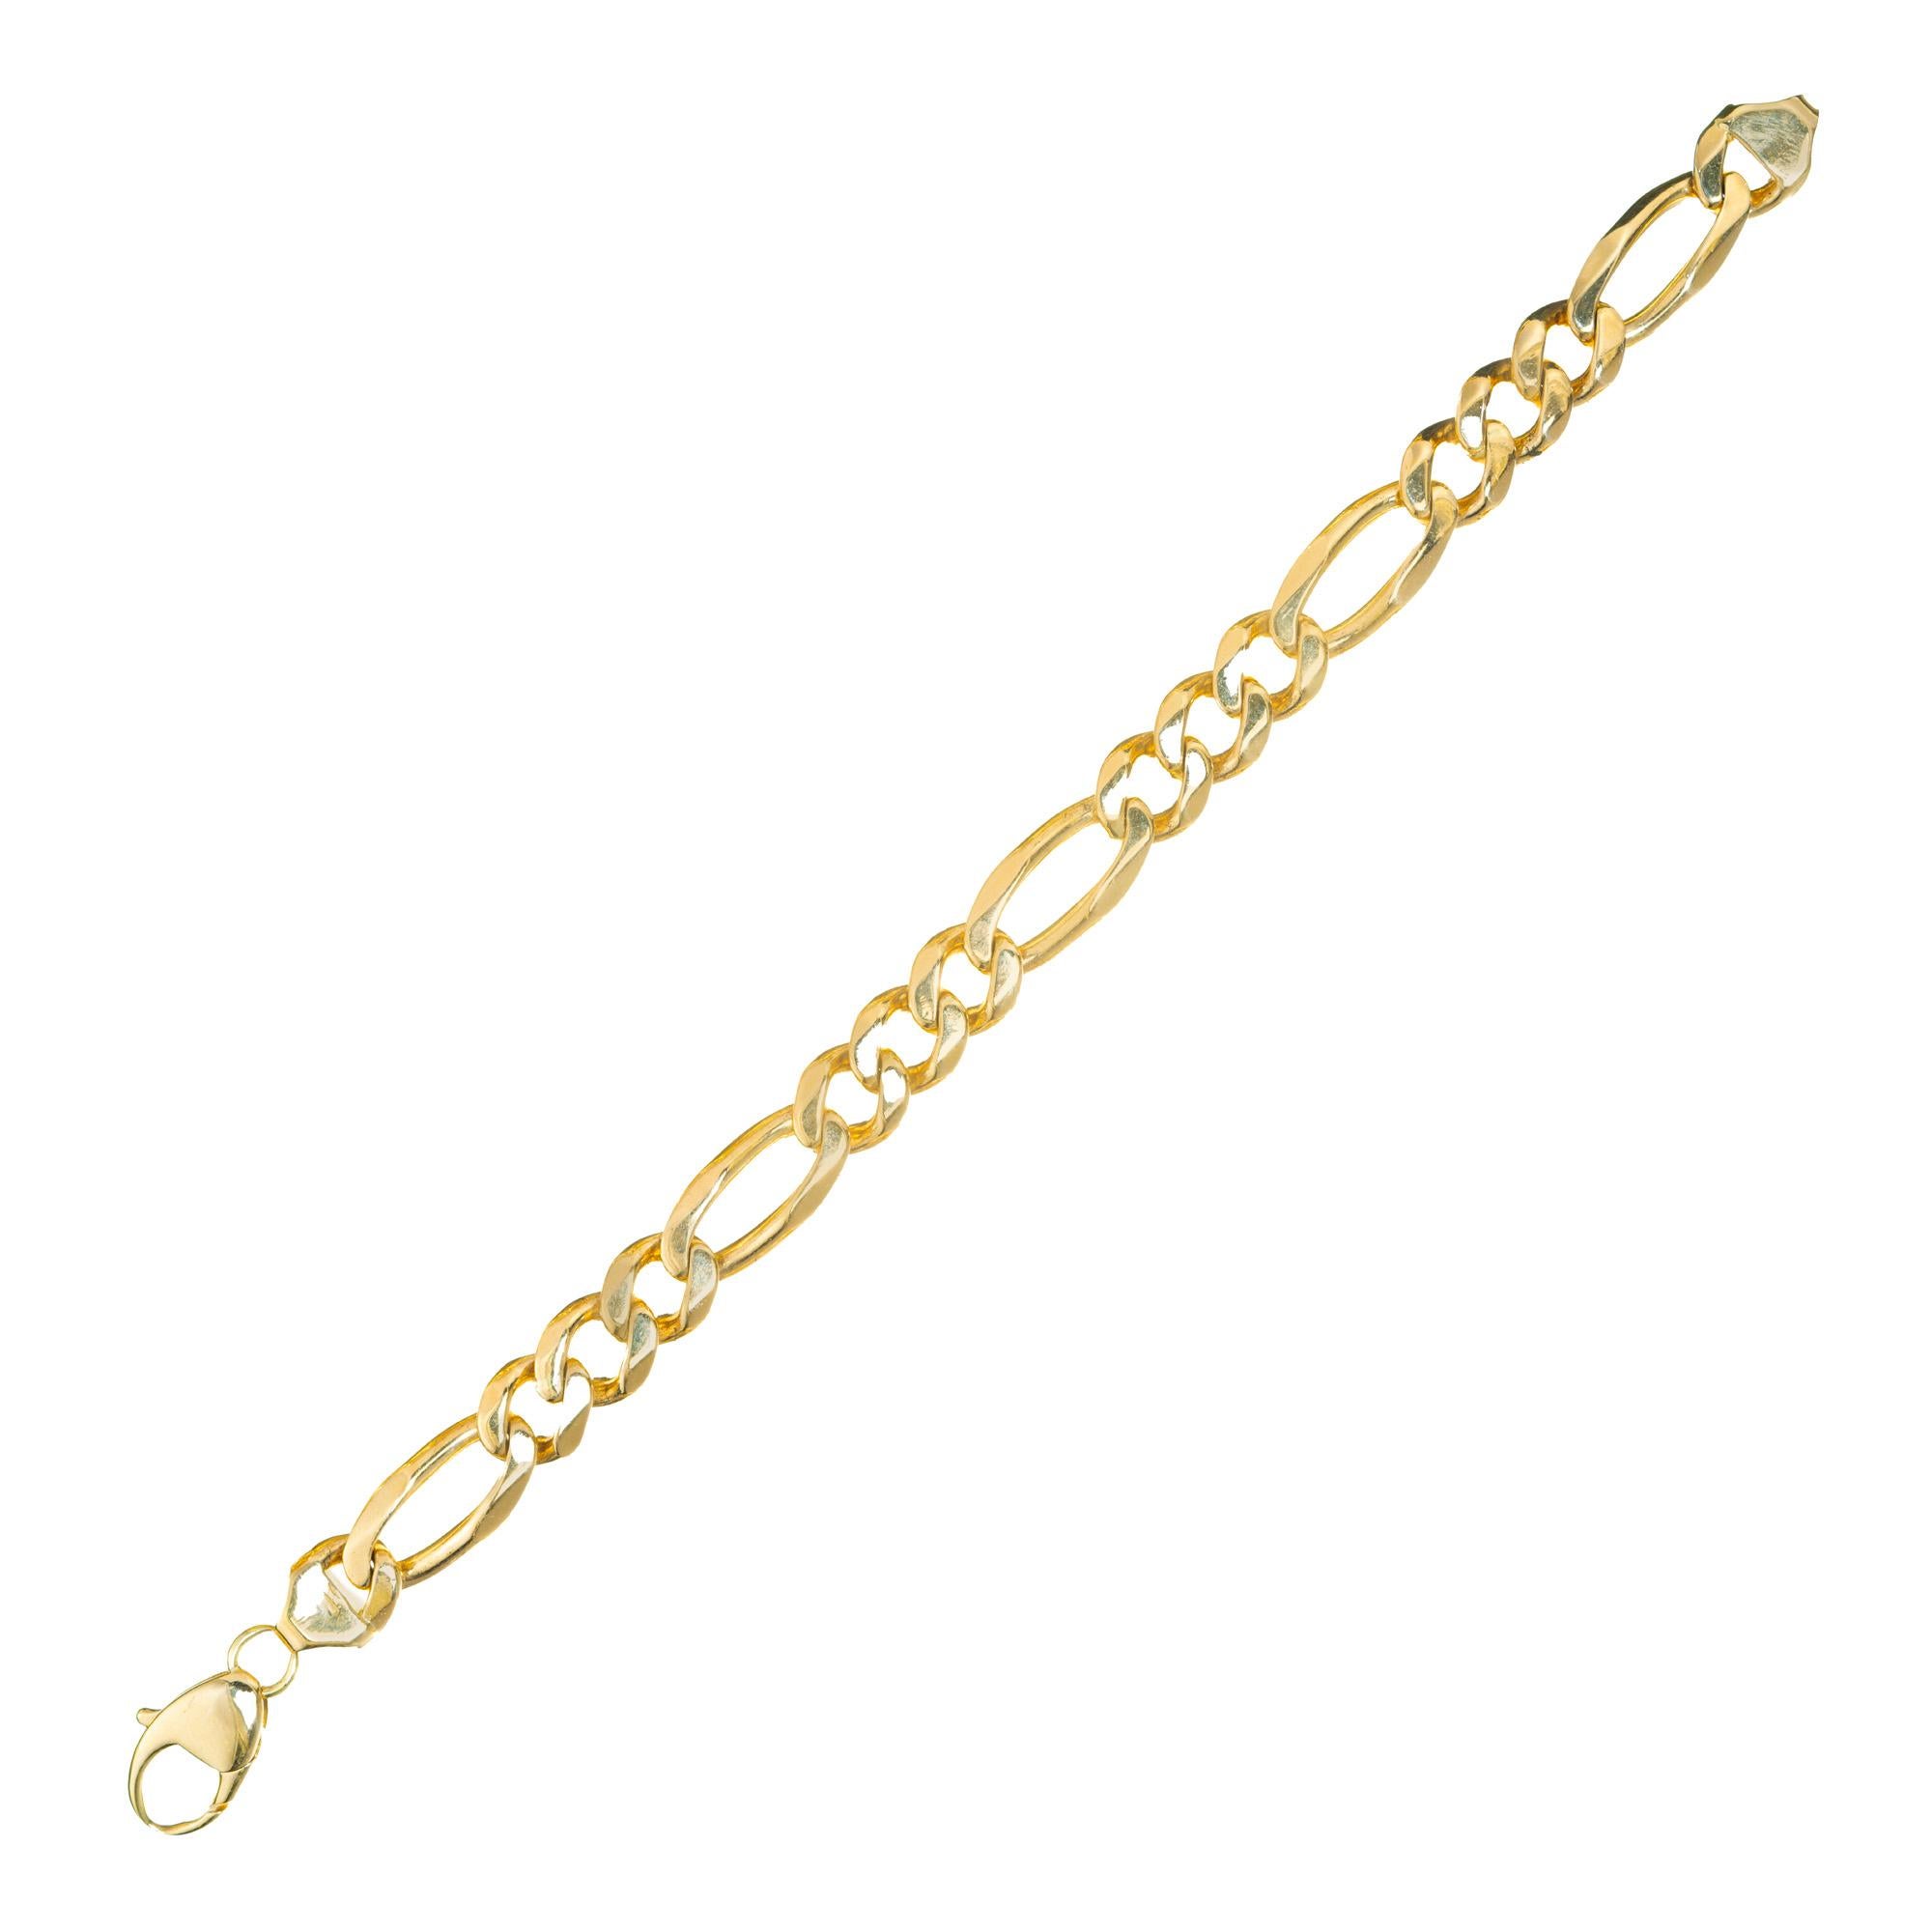 Solid 10 Inch men's 12mm Figaro link 14k yellow gold bracelet. 

14k yellow gold 
Stamped: 14 Italy
Hallmark: ORITALIA
62.7 grams
Width: 12mm or .48 Inches
Depth or thickness: 4.15mm
Bracelet: 10 Inches

